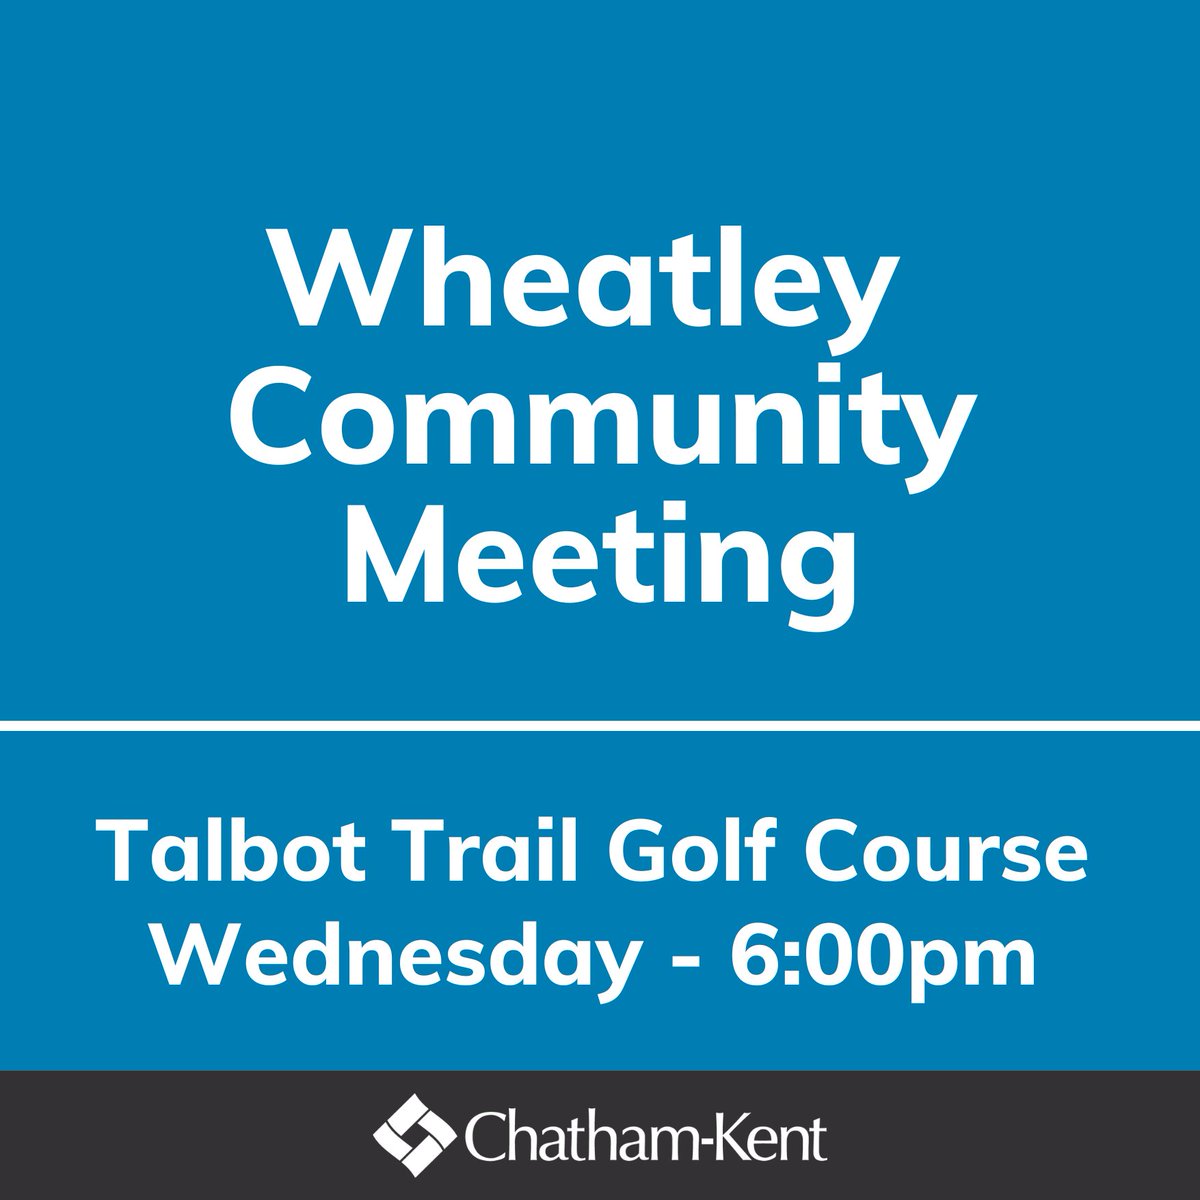 Join us for the Wheatley Update Meeting! Wednesday, March 1 - 6:00 pm Talbot Trail Golf Course - 790 Talbot Trail, Wheatley Municipal staff and provincial representatives will provide an update and answer questions. letstalkchatham-kent.ca/wheatley-updat… #ckont